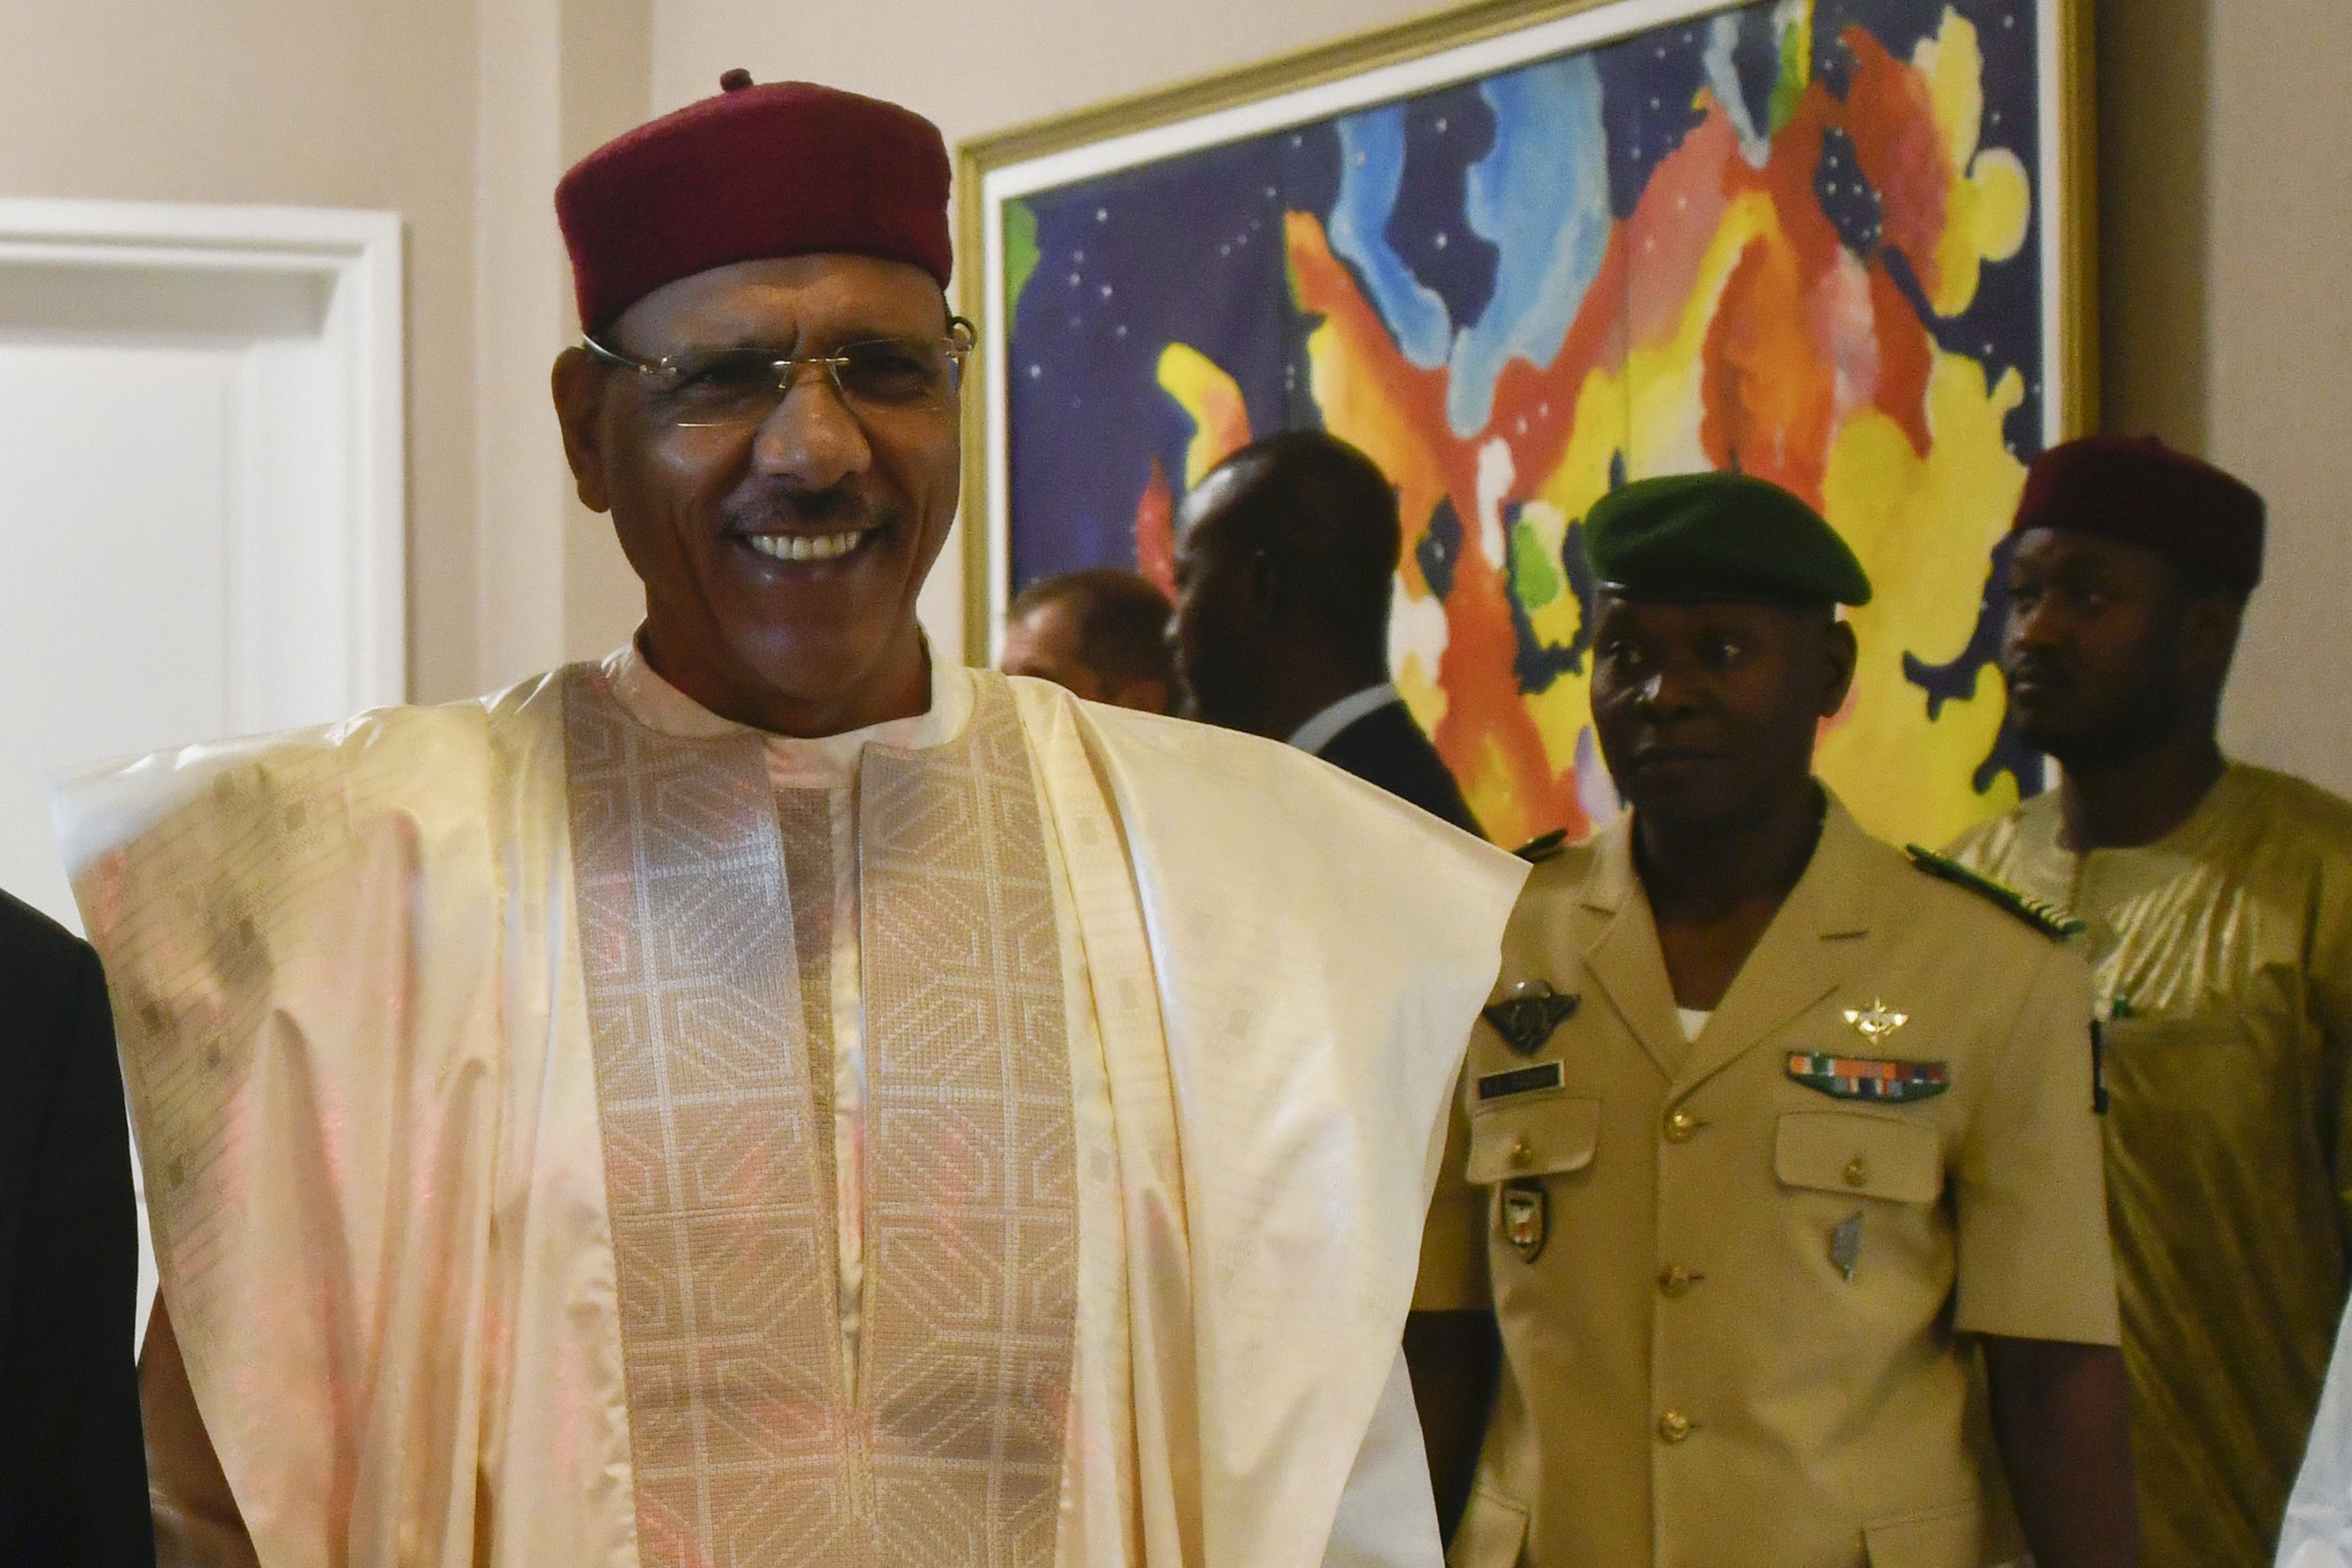 ECOWAS emissaries visited the ousted president Mohamed Bazoum and found that he is 